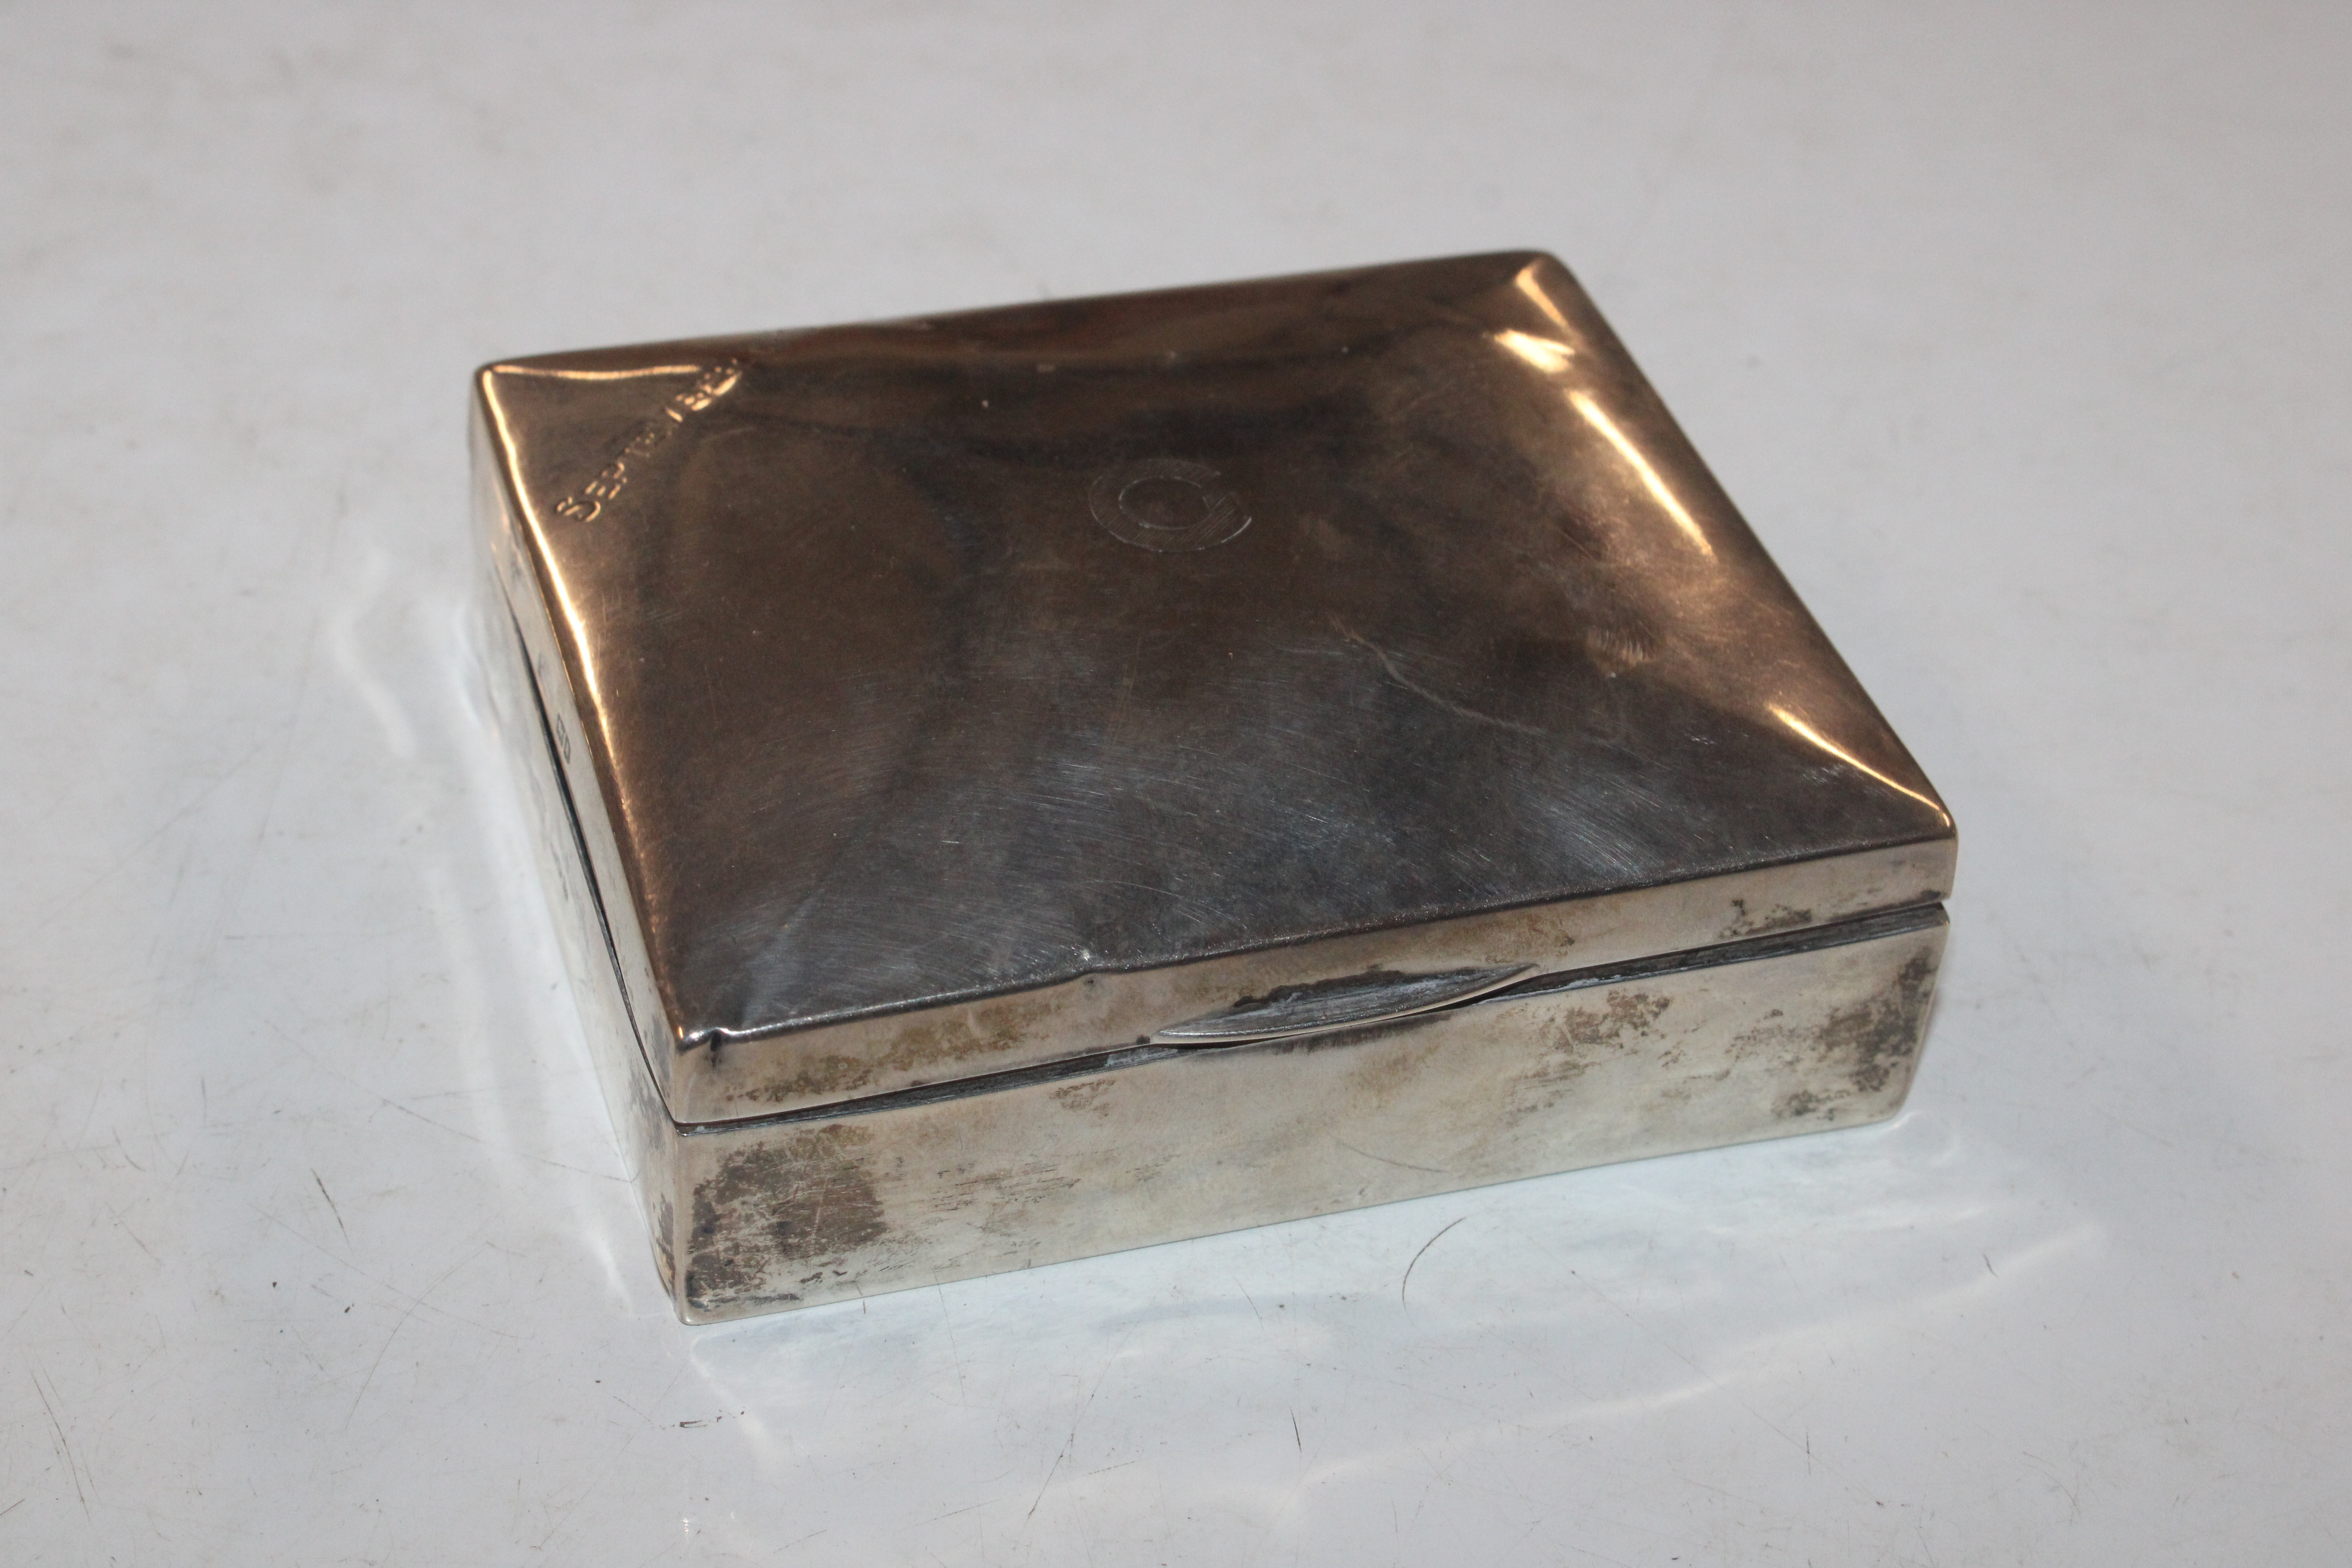 A Mappin & Webb silver cigarette box with wooden liner, engraved